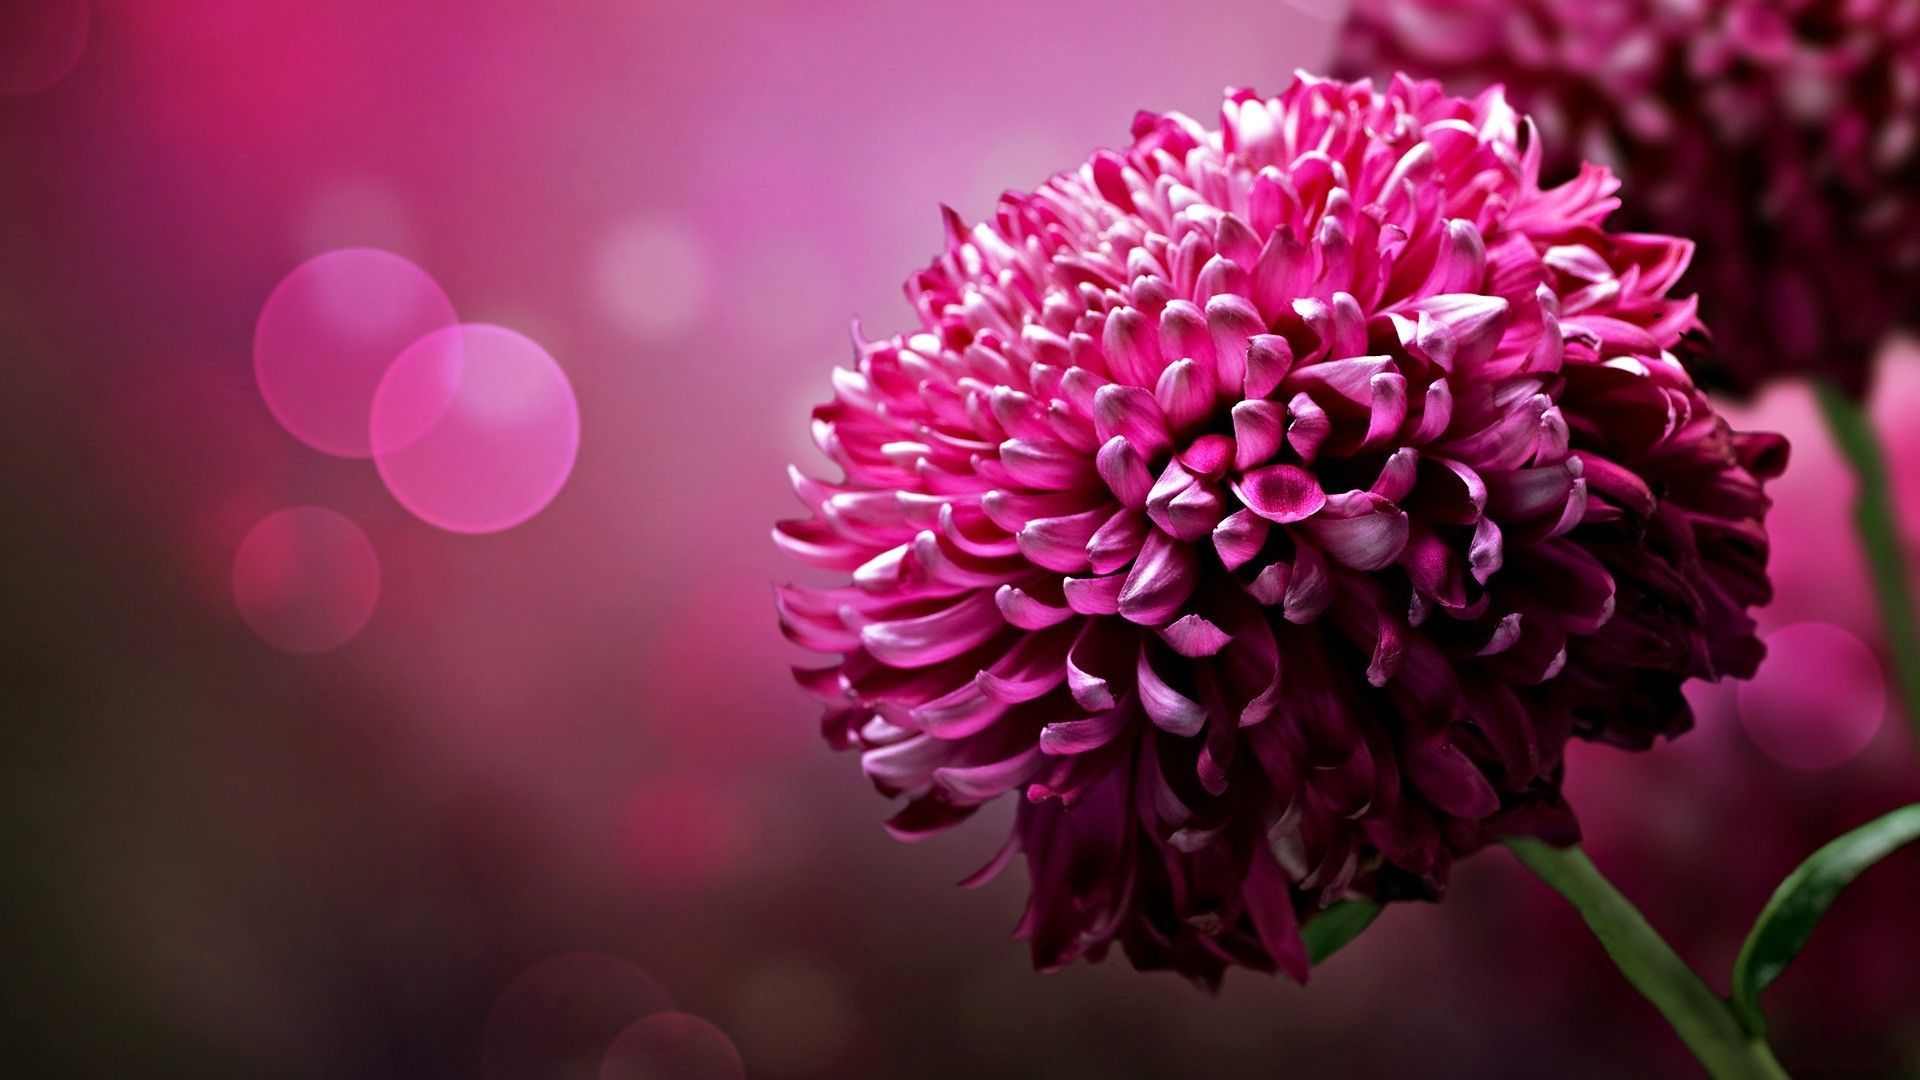 flowers wallpapers and wallpapers Download